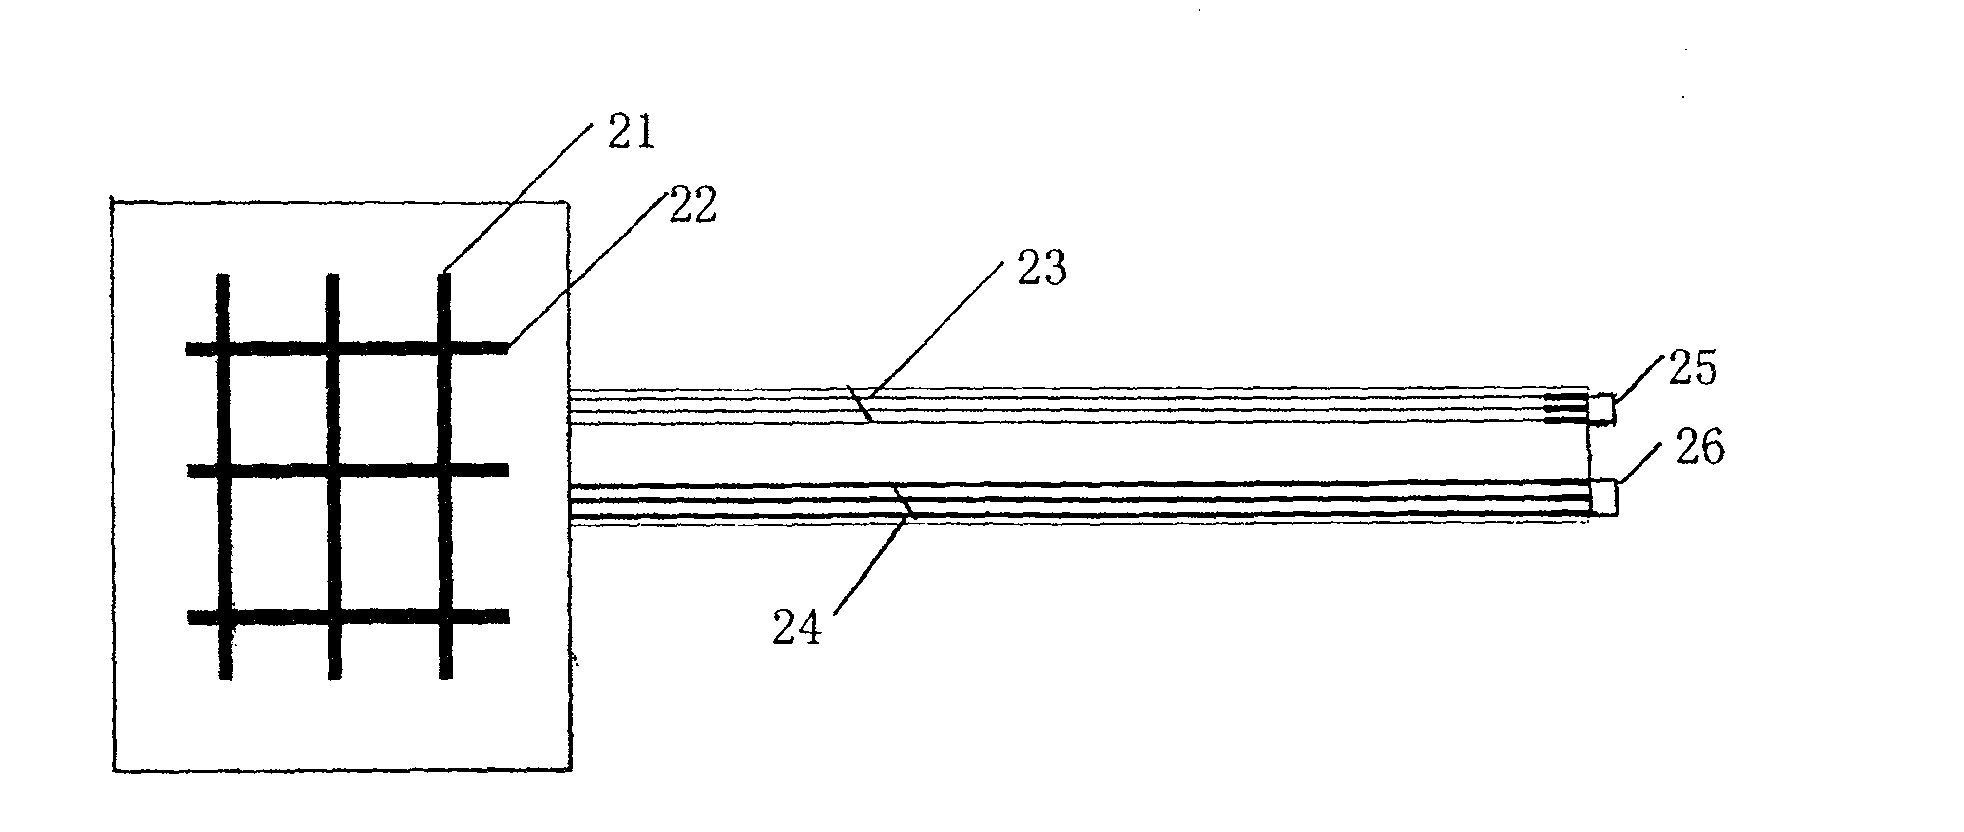 System for monitoring curved surface interlaminar extrusion pressure based on array type ultra-thin submissive force sensor